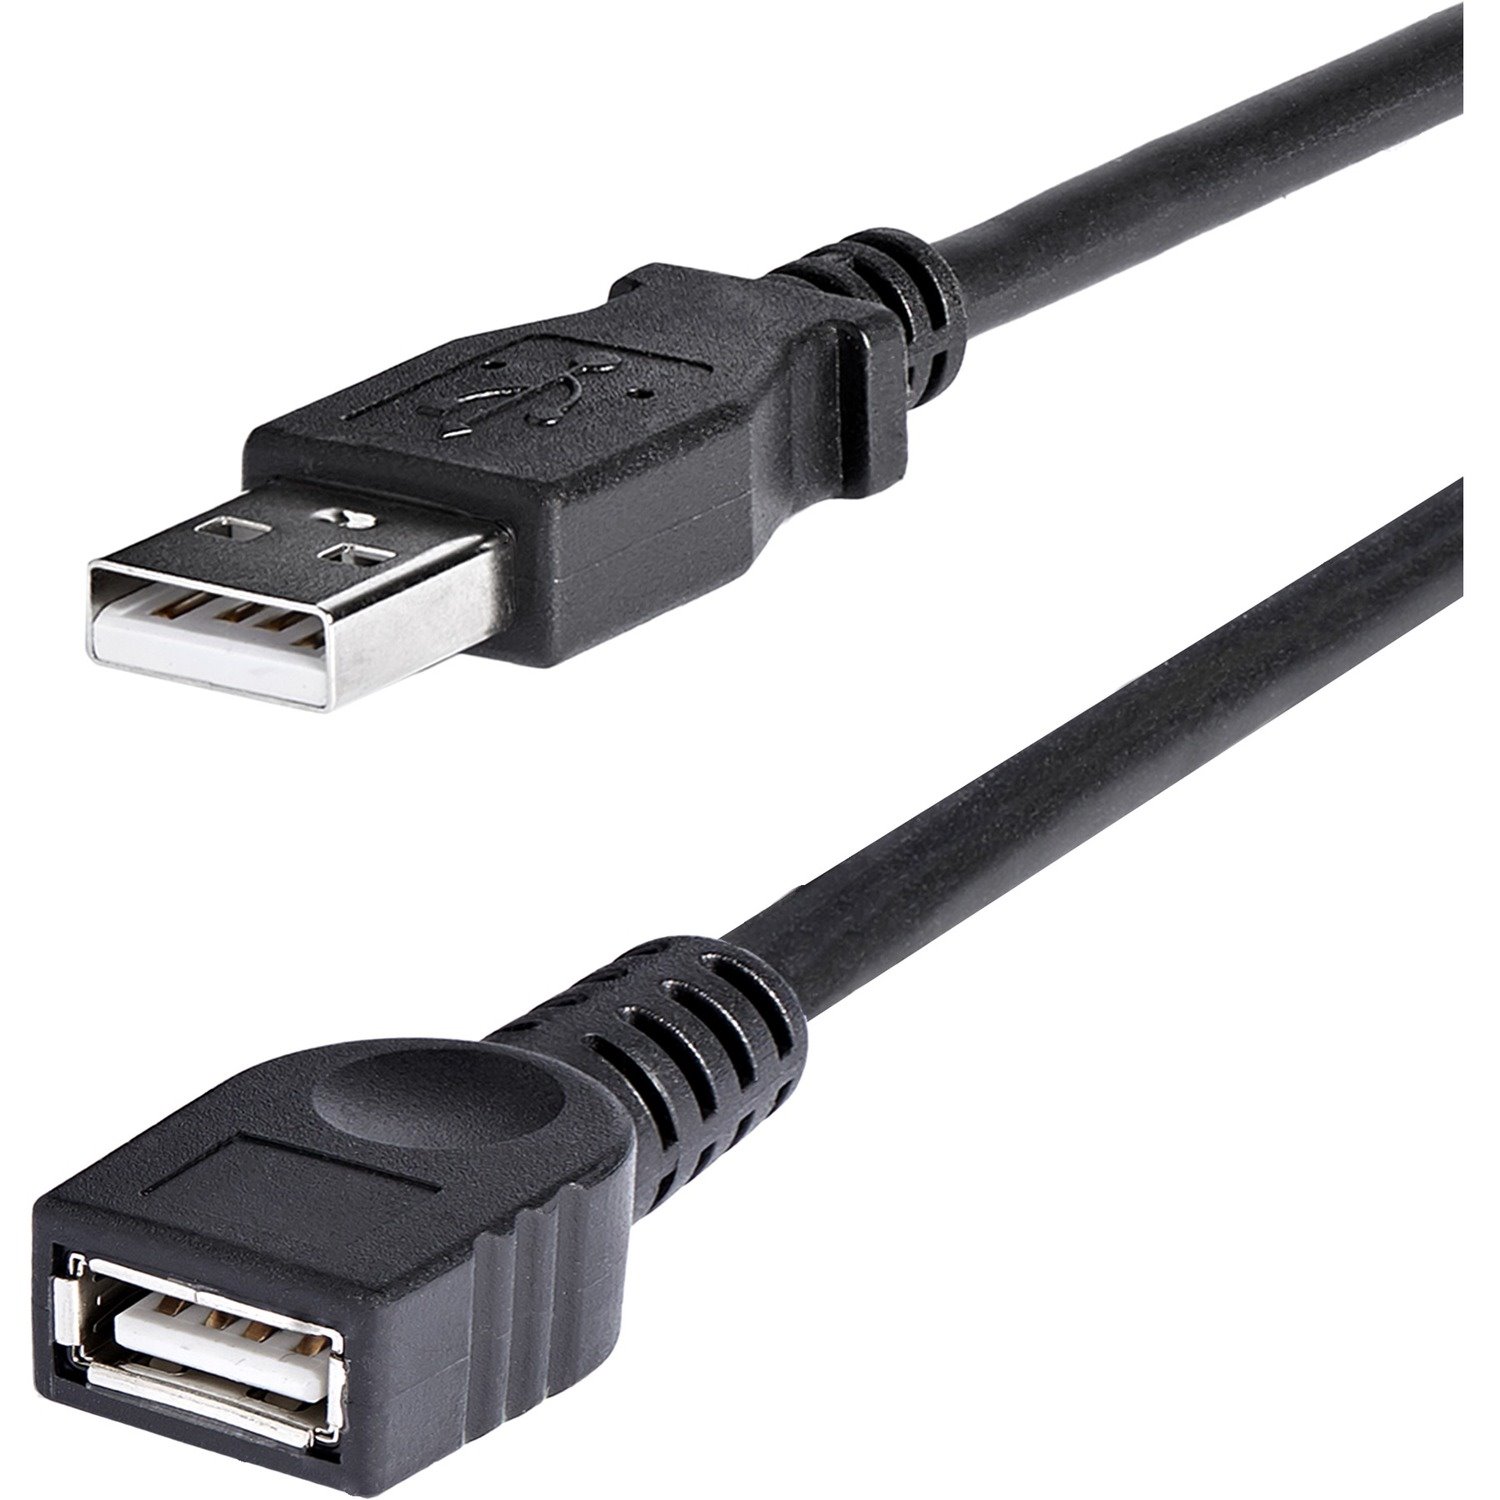 StarTech.com 1.83 m USB Data Transfer Cable for Peripheral Device, PC, MAC, Printer - 1